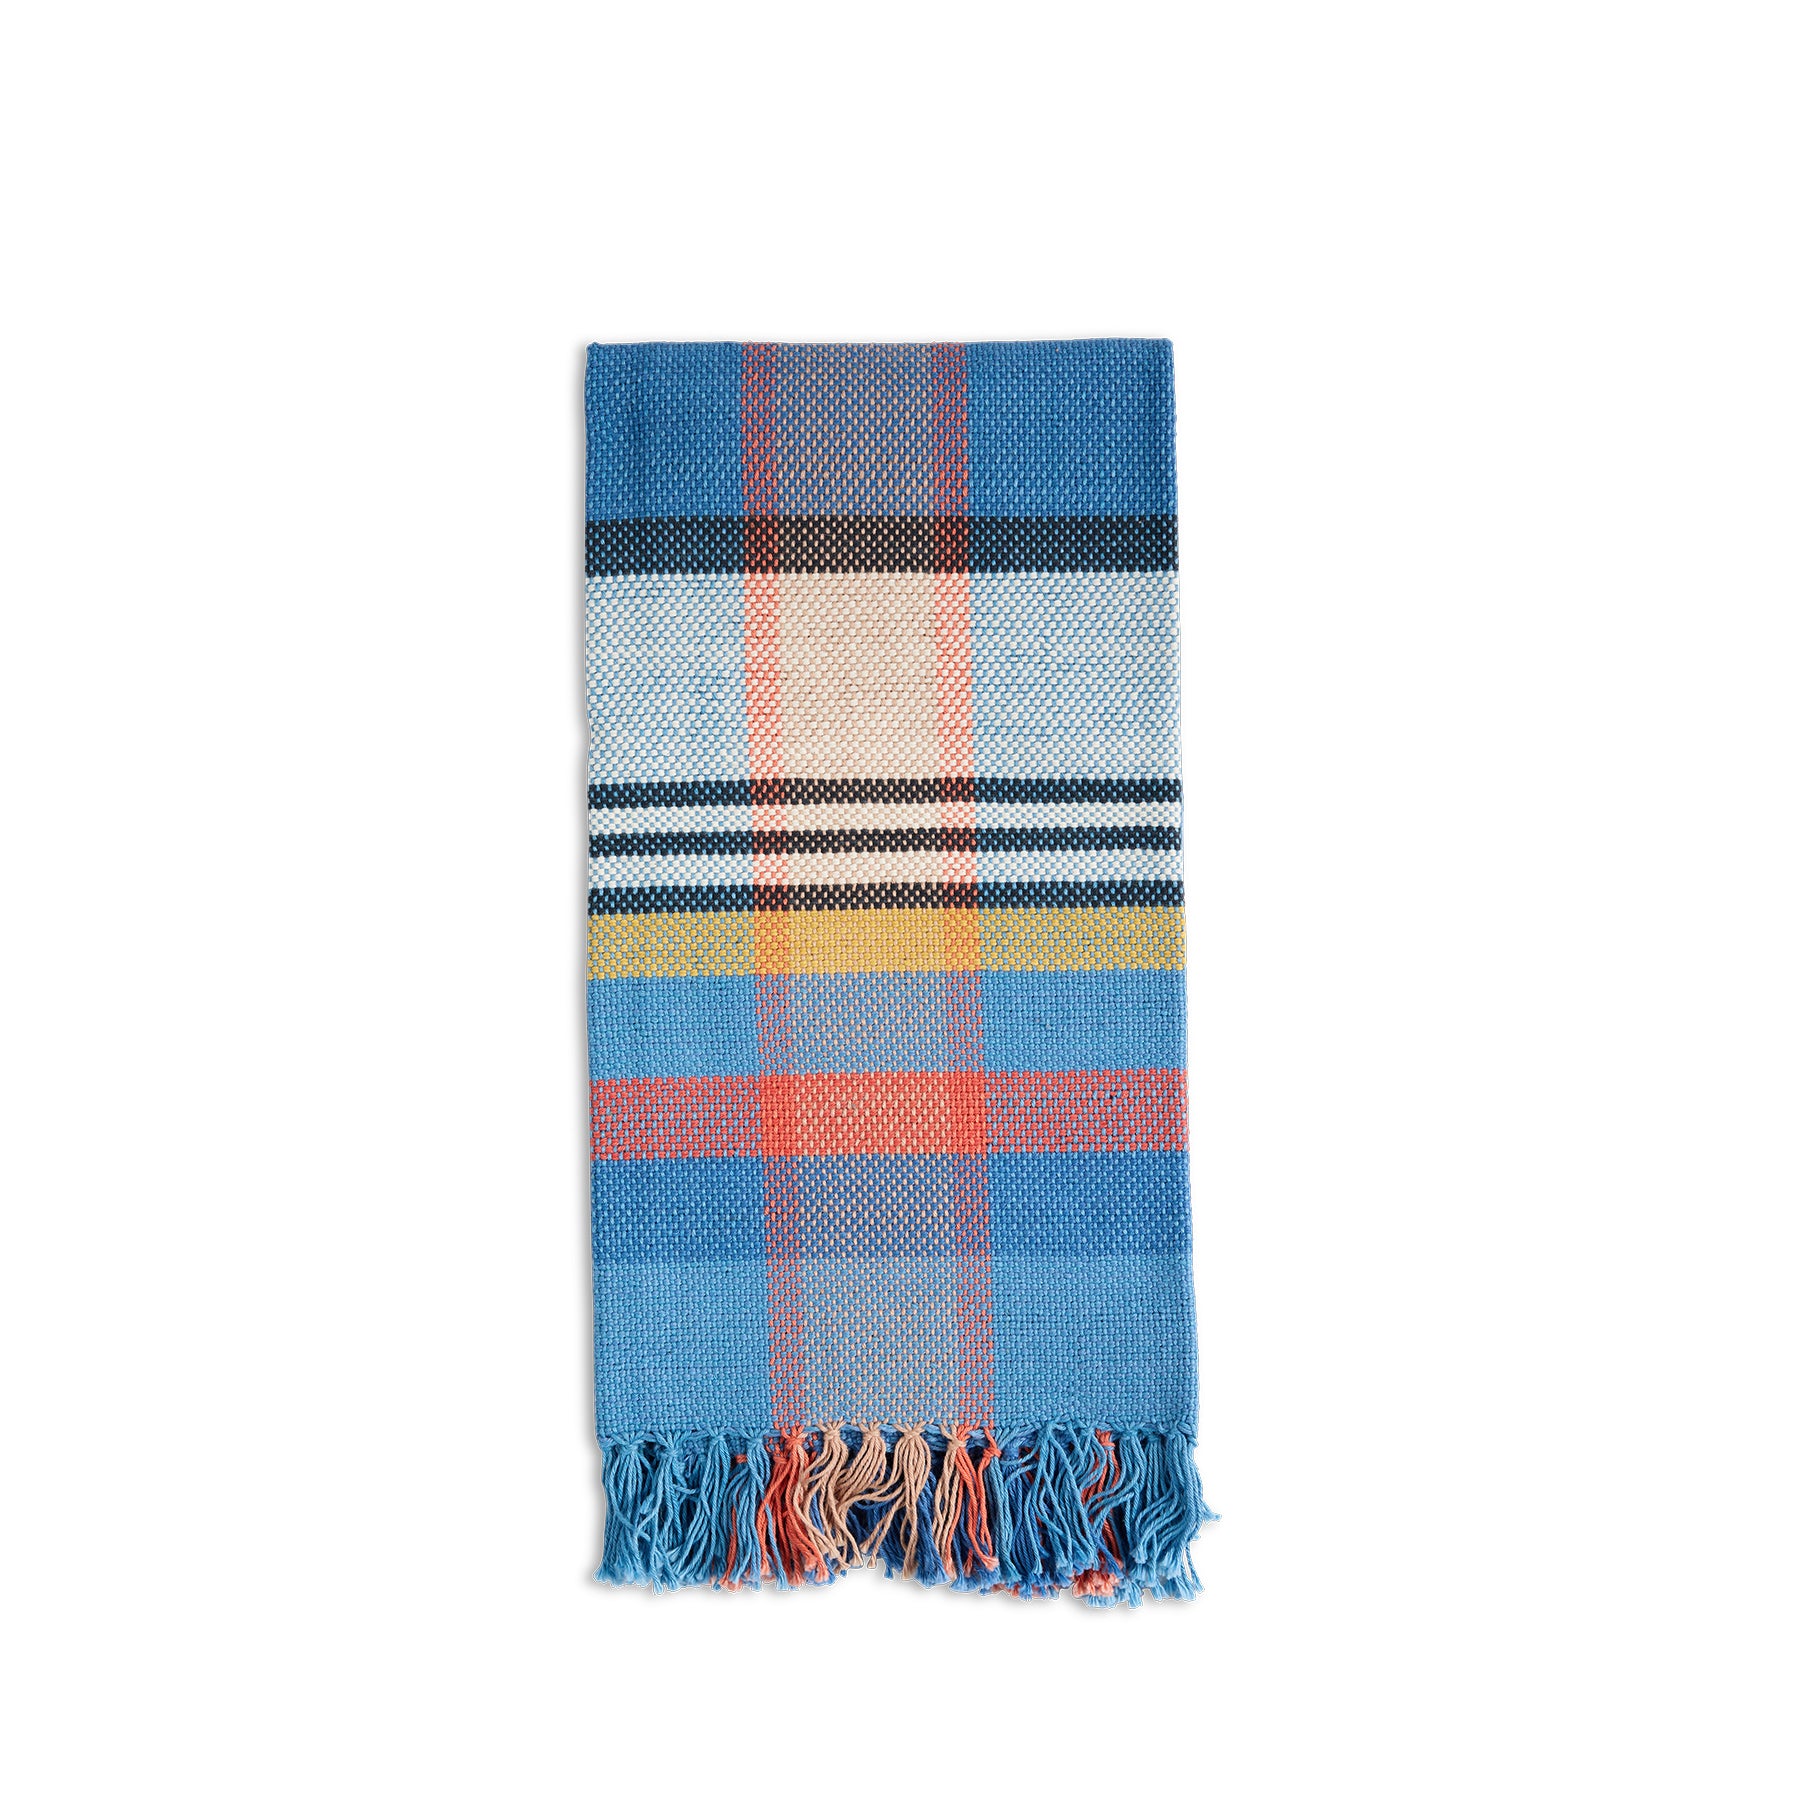 Towel/Runner in Country Blue Plaid Zoom Image 1